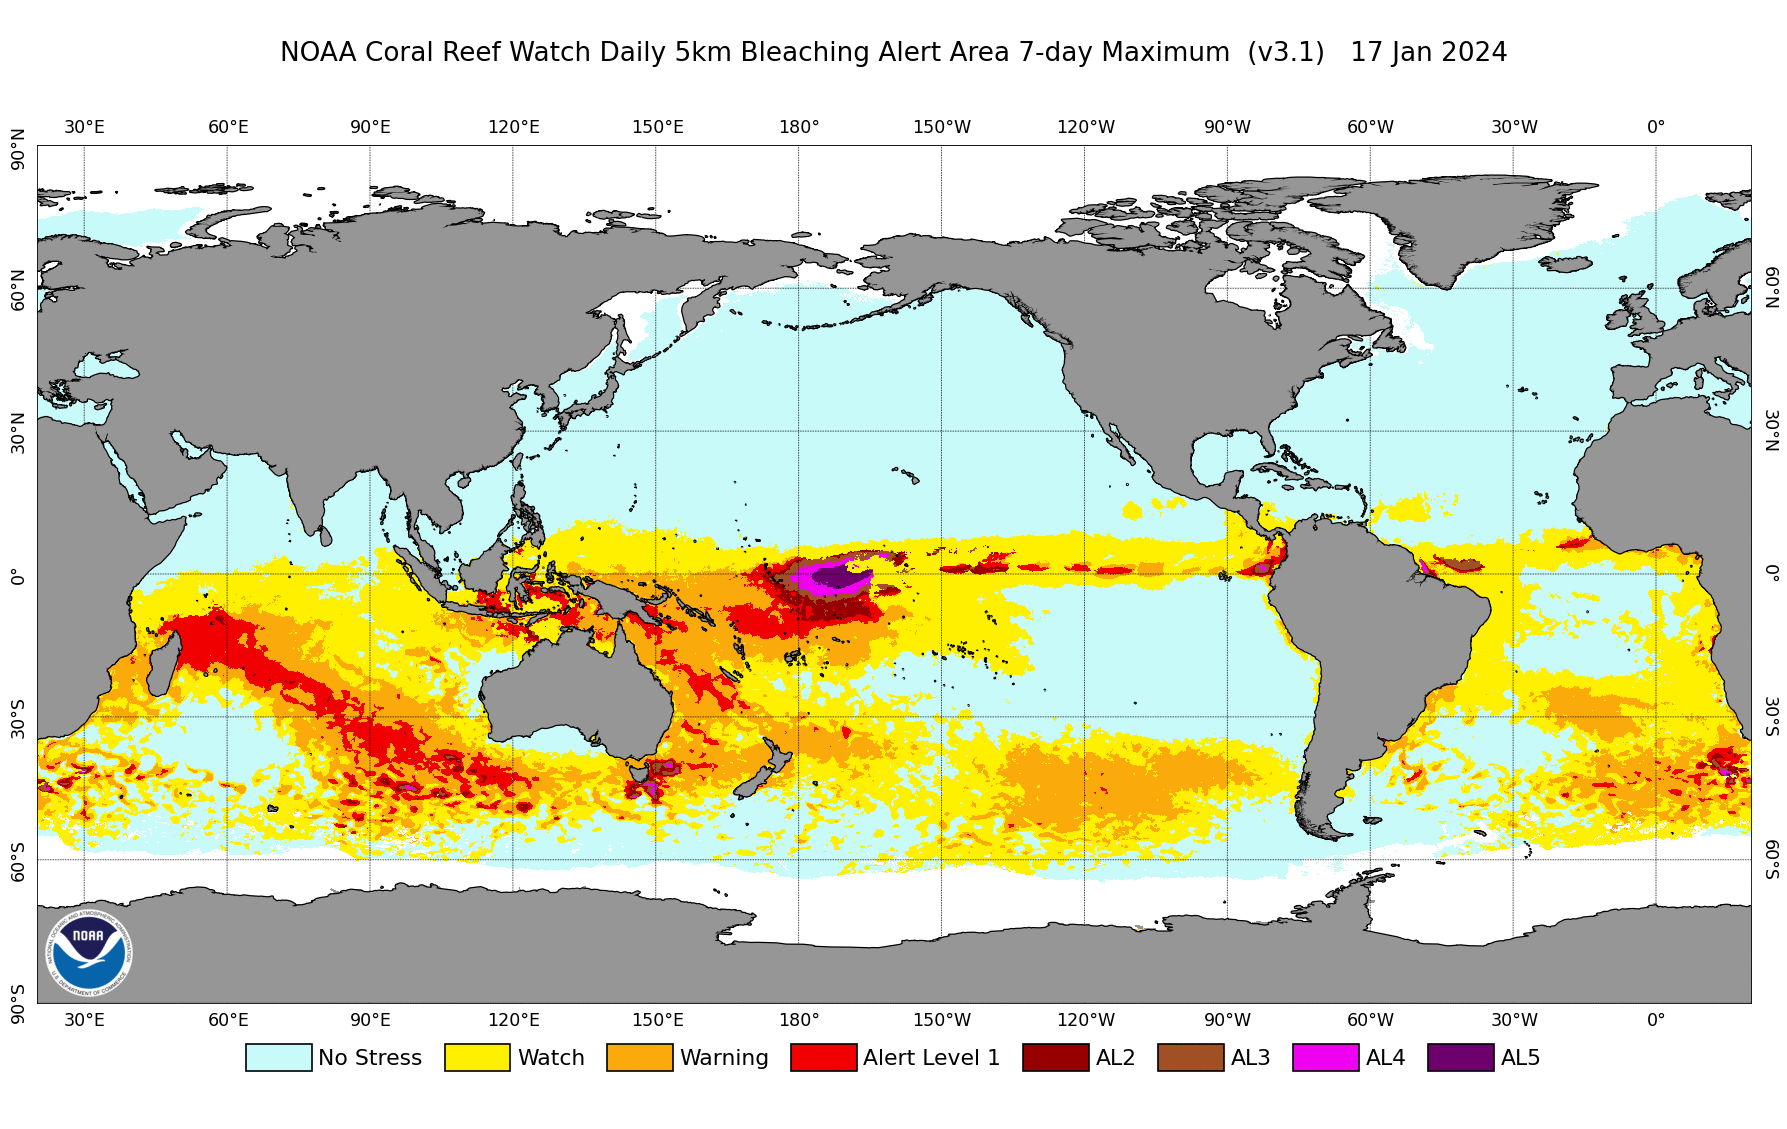 A global heat map showing coral bleaching heat stress alert areas - the highlighted areas are mainly concentrated around the globe's equator